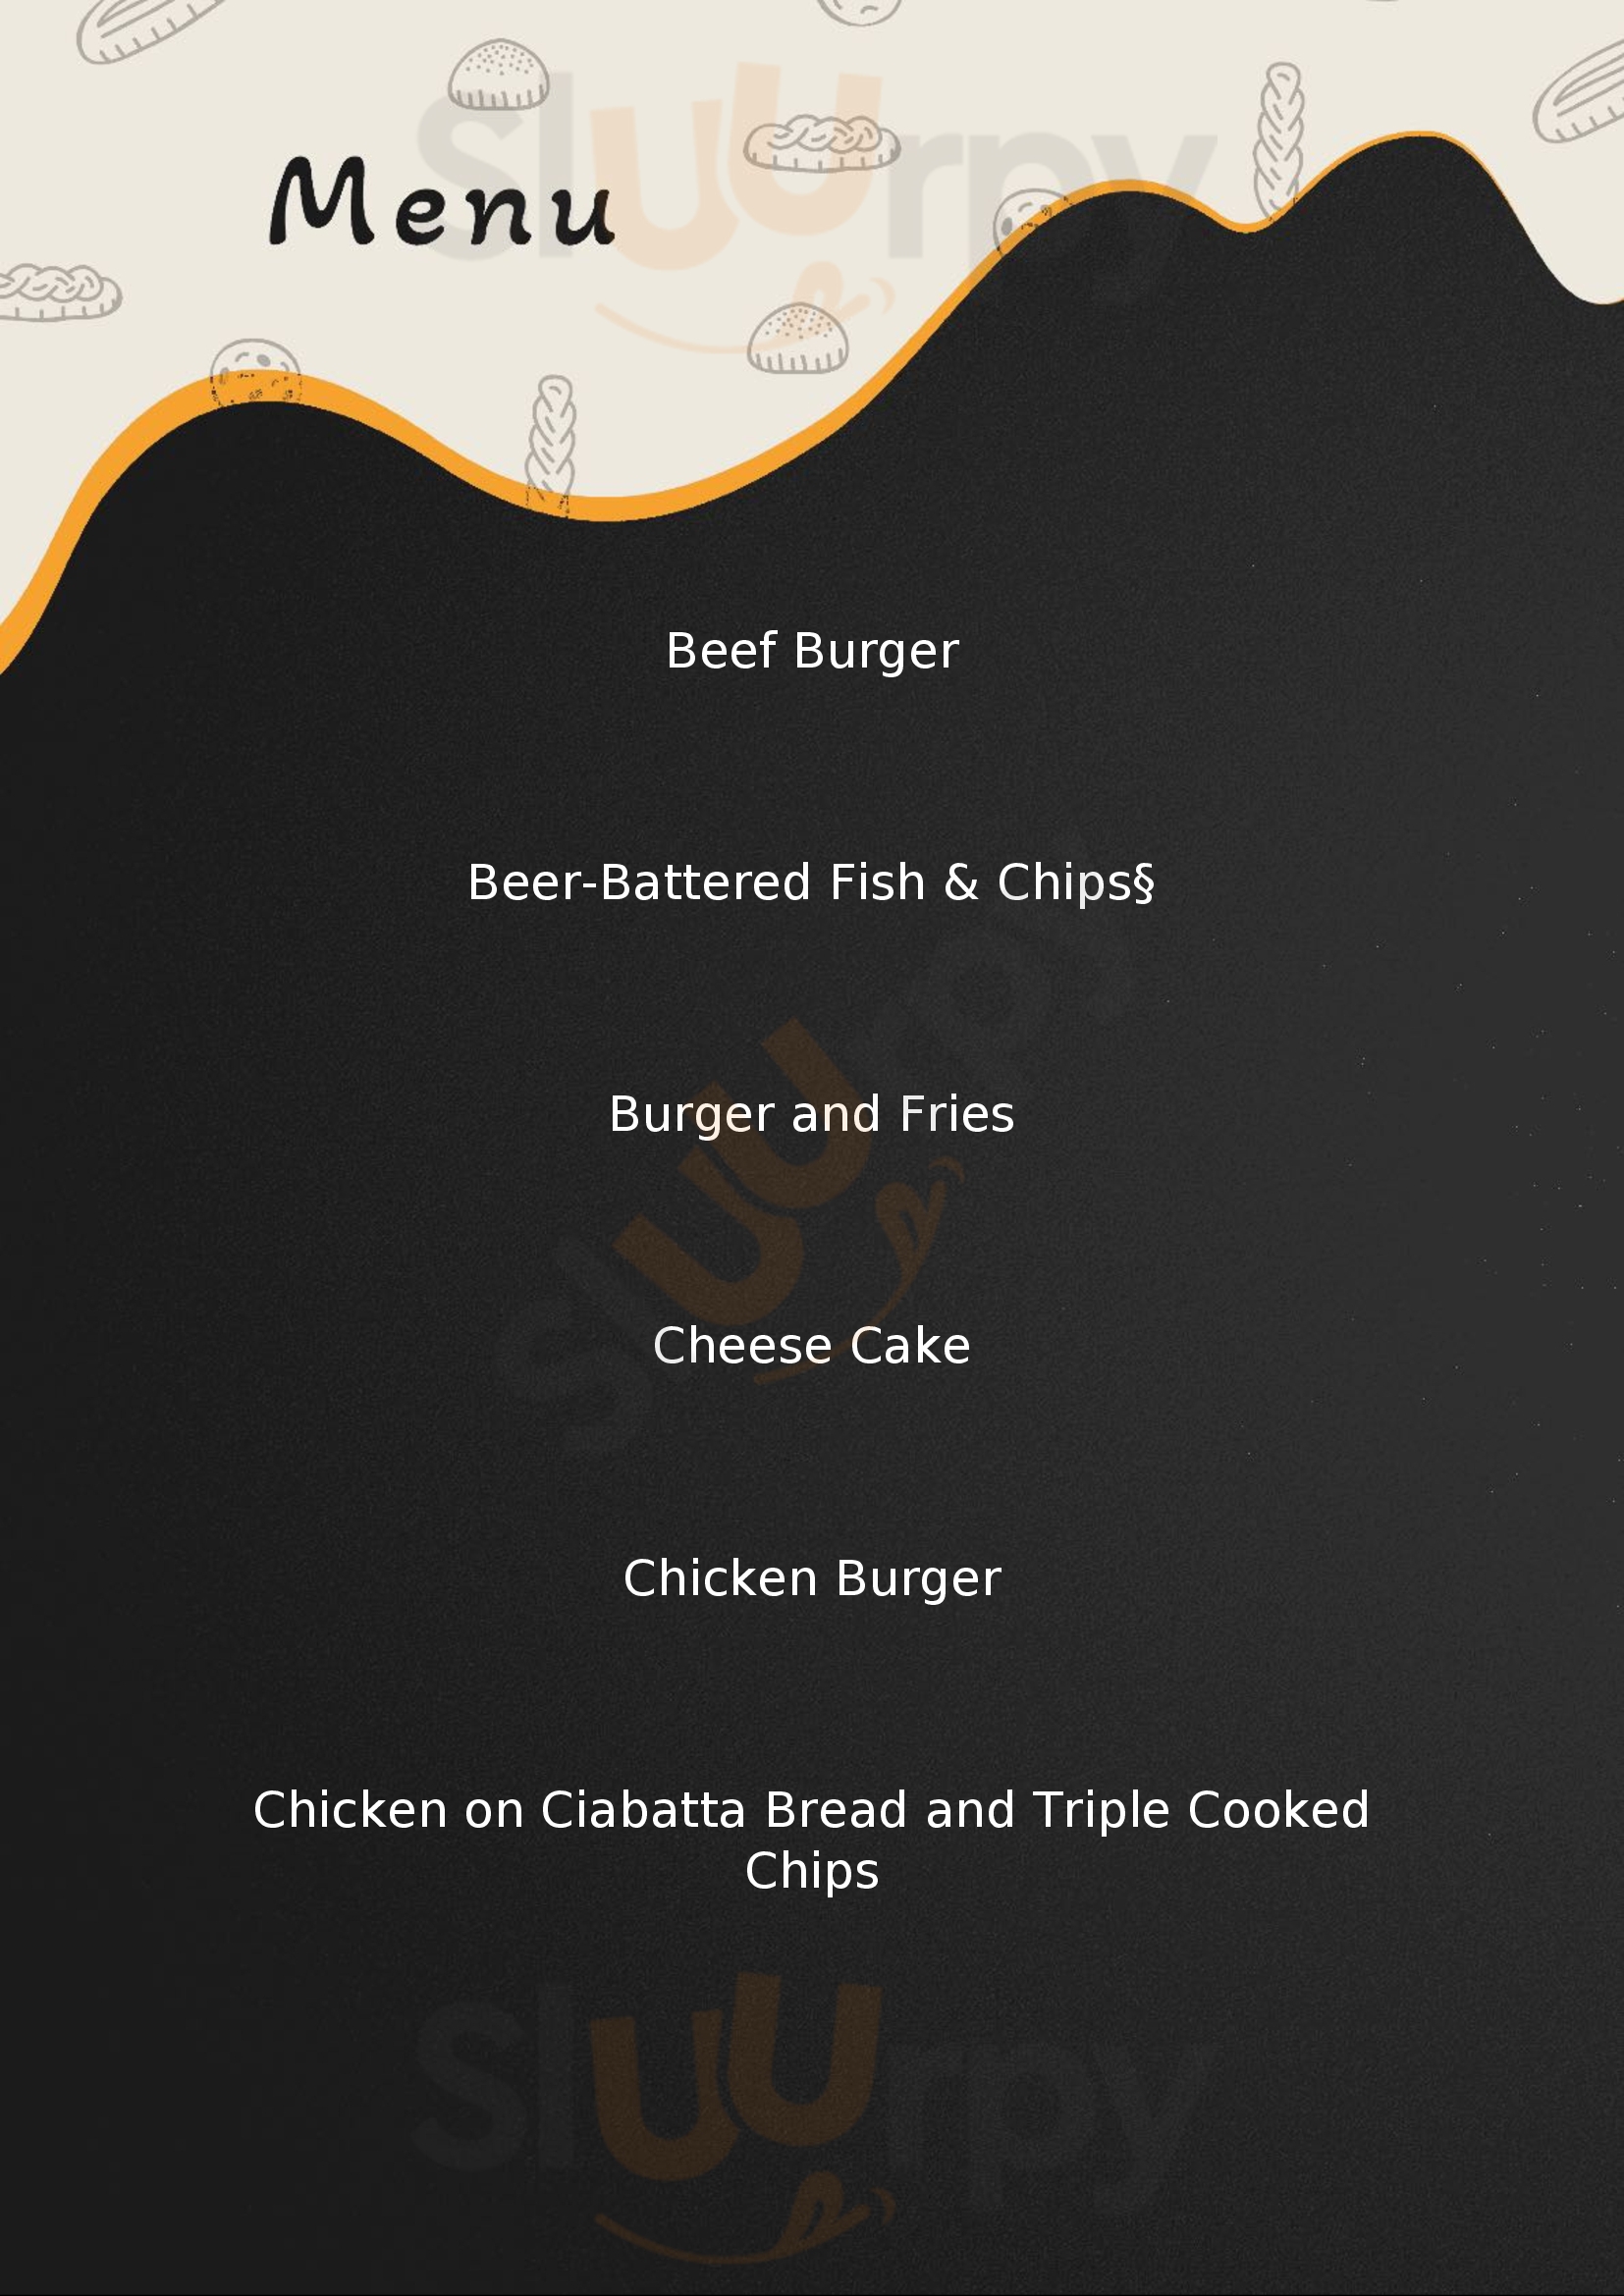 The Longbow Beefeater Llantrisant Menu - 1